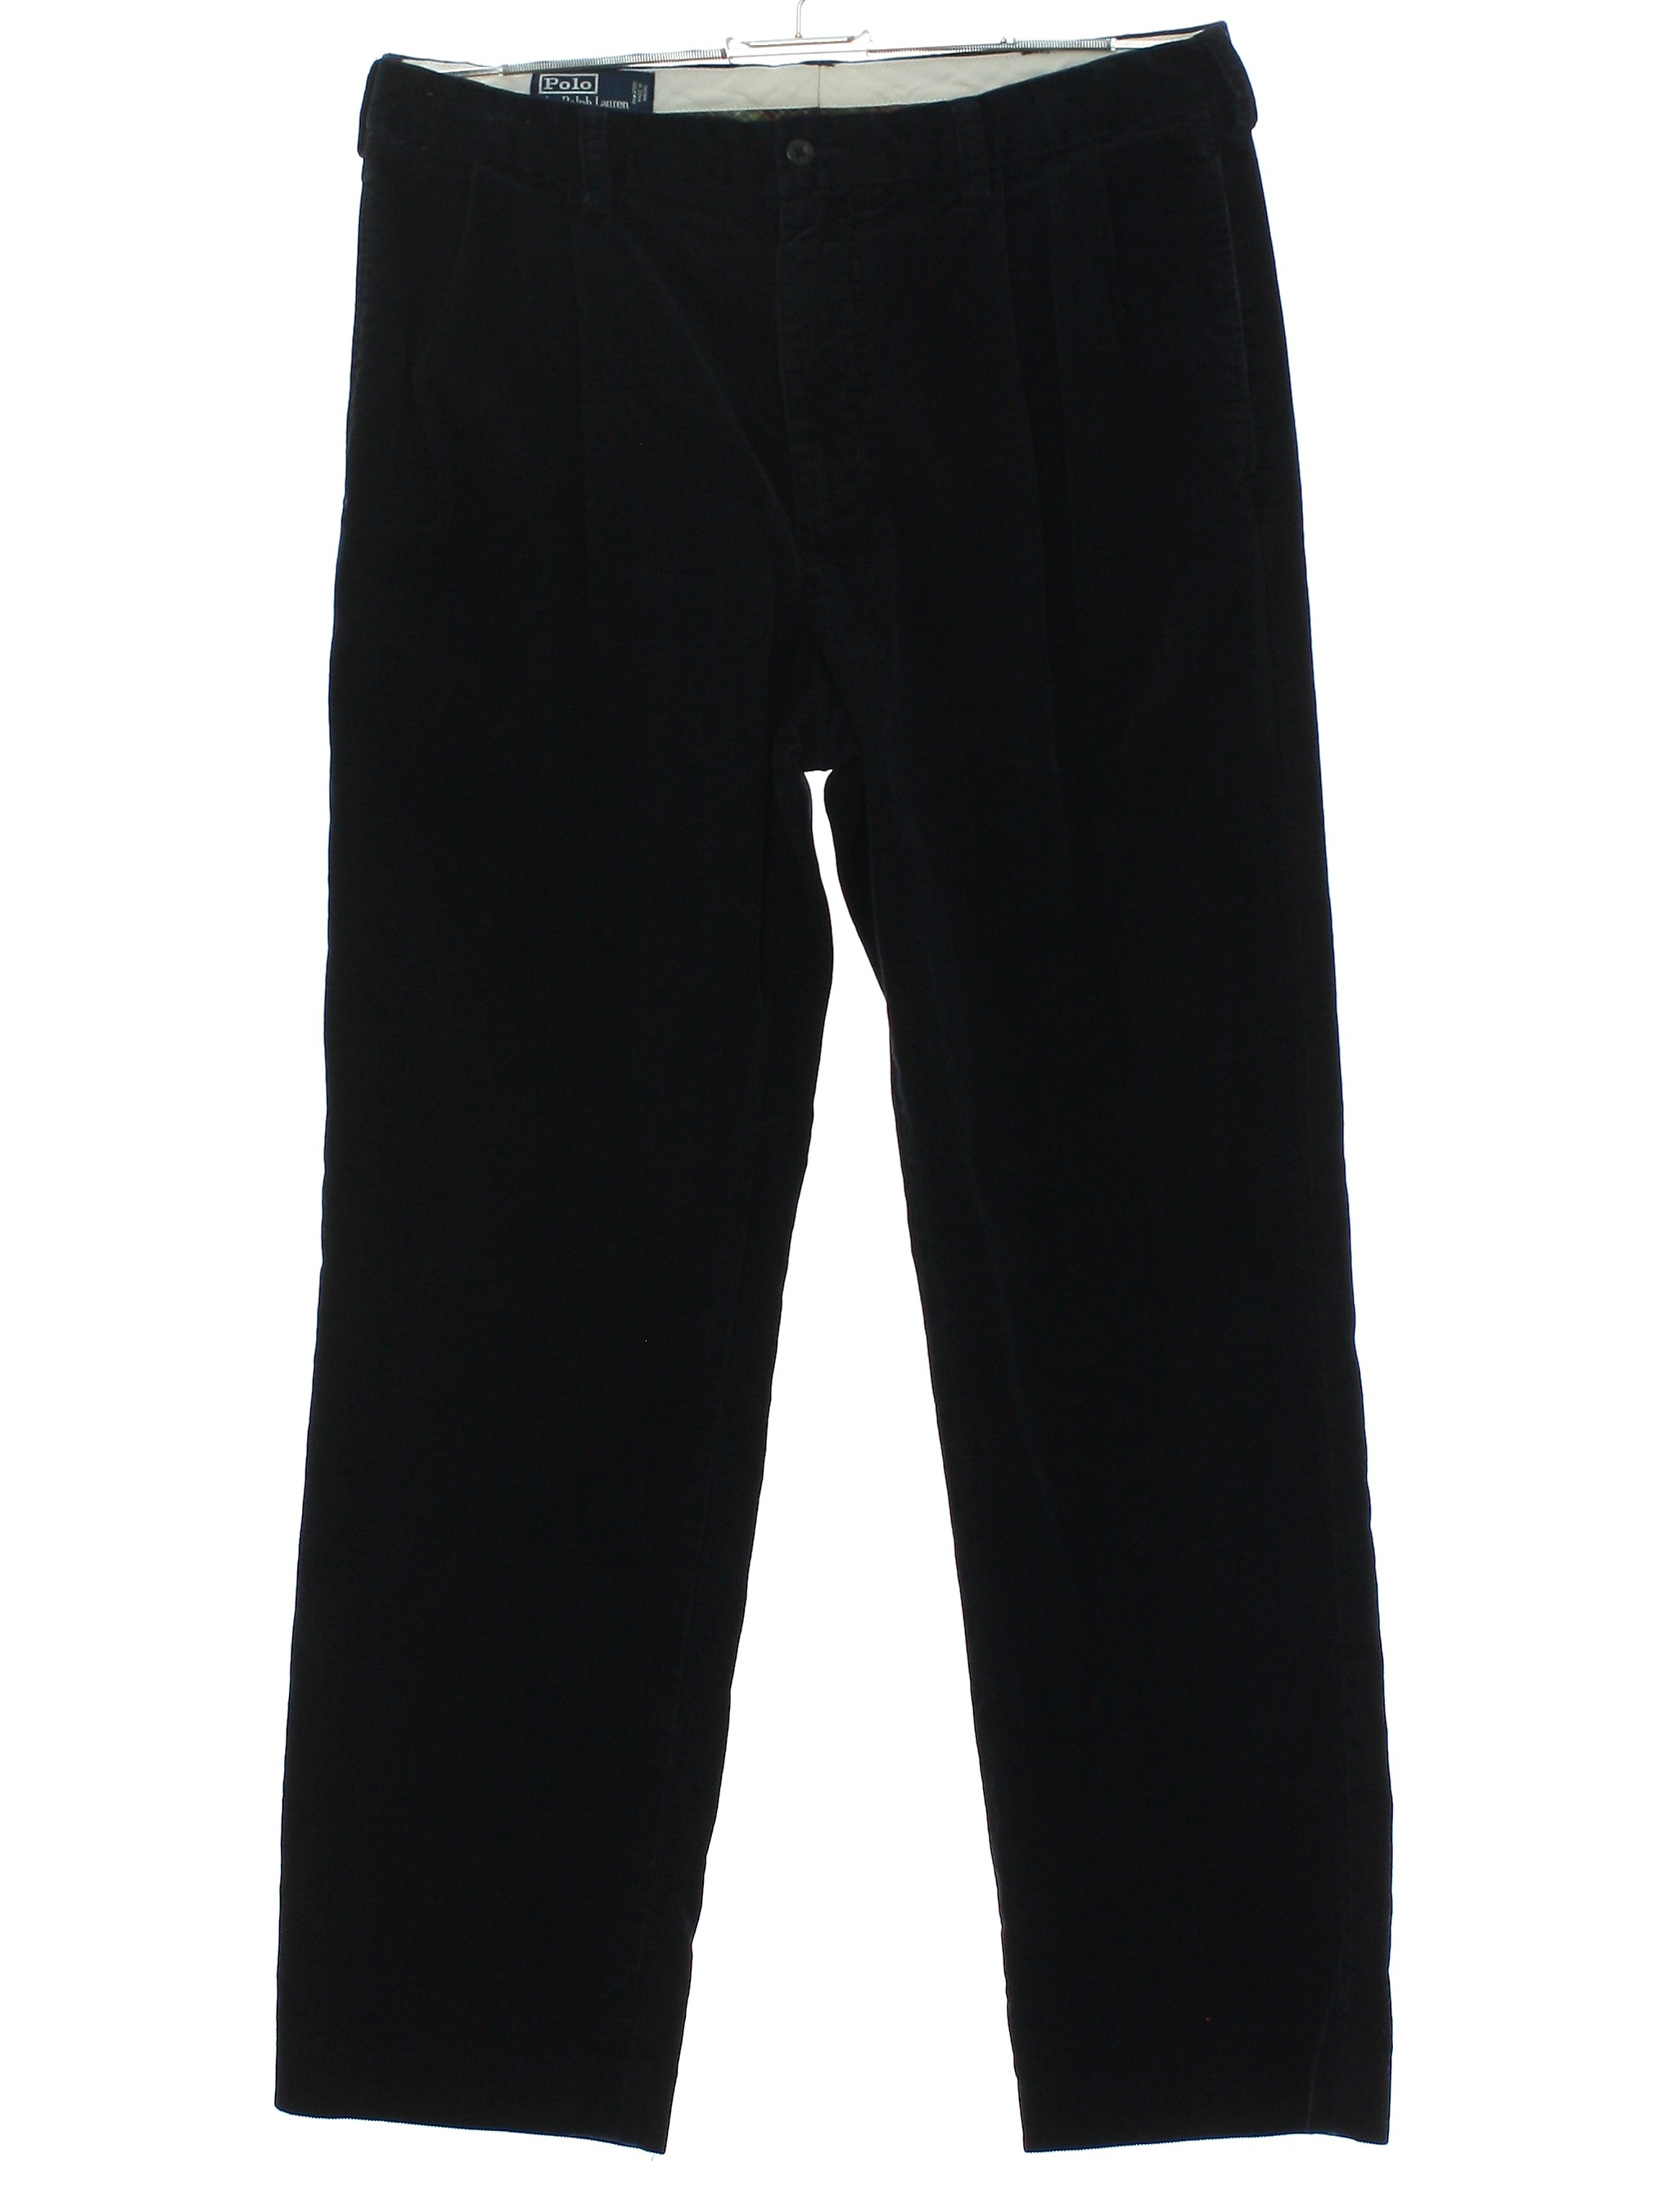 Pants: 90s -Polo by Ralph Lauren- Mens midnight blue solid colored ...